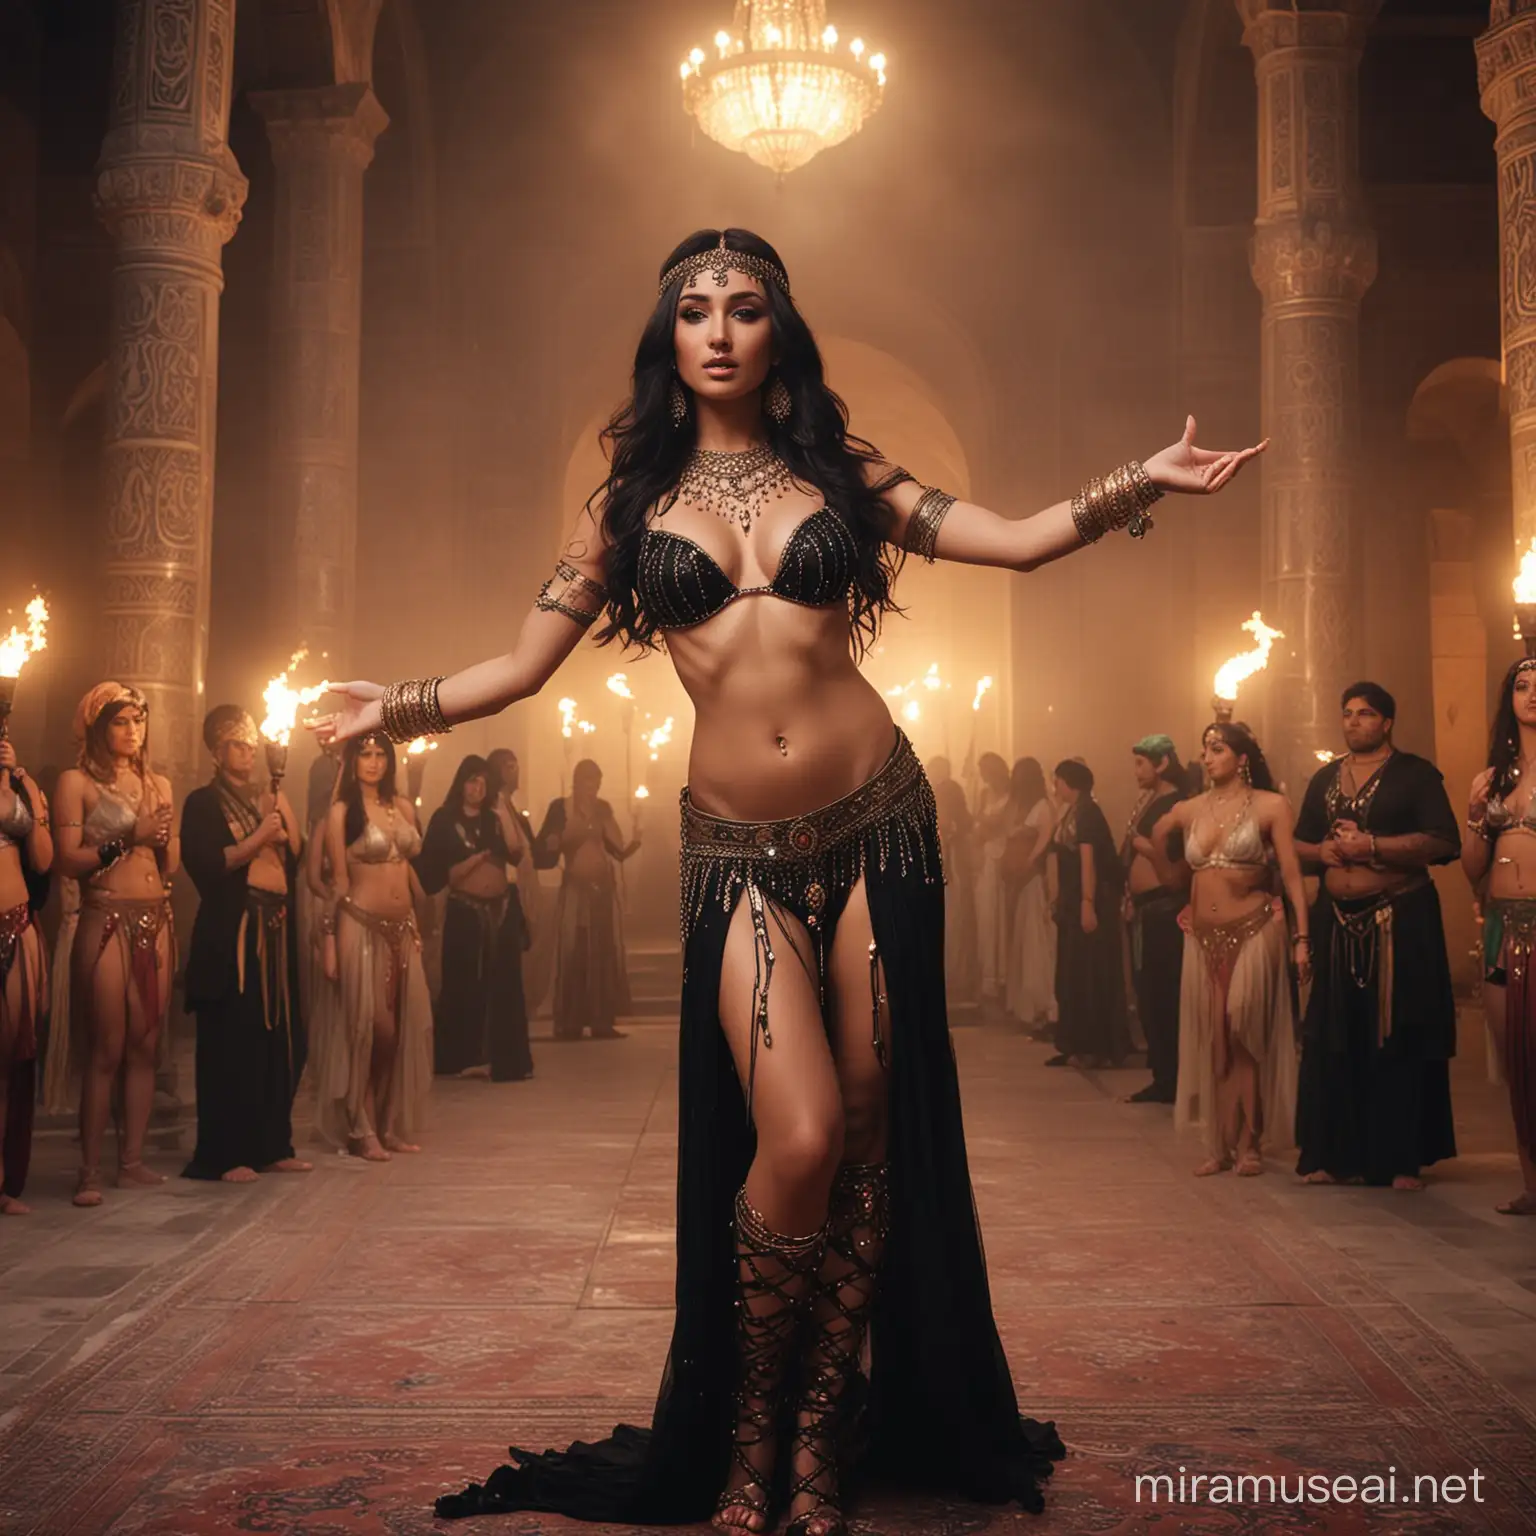 Exotic Belly Dancer Performs in Opulent Palace Amidst Warriors and Ruler